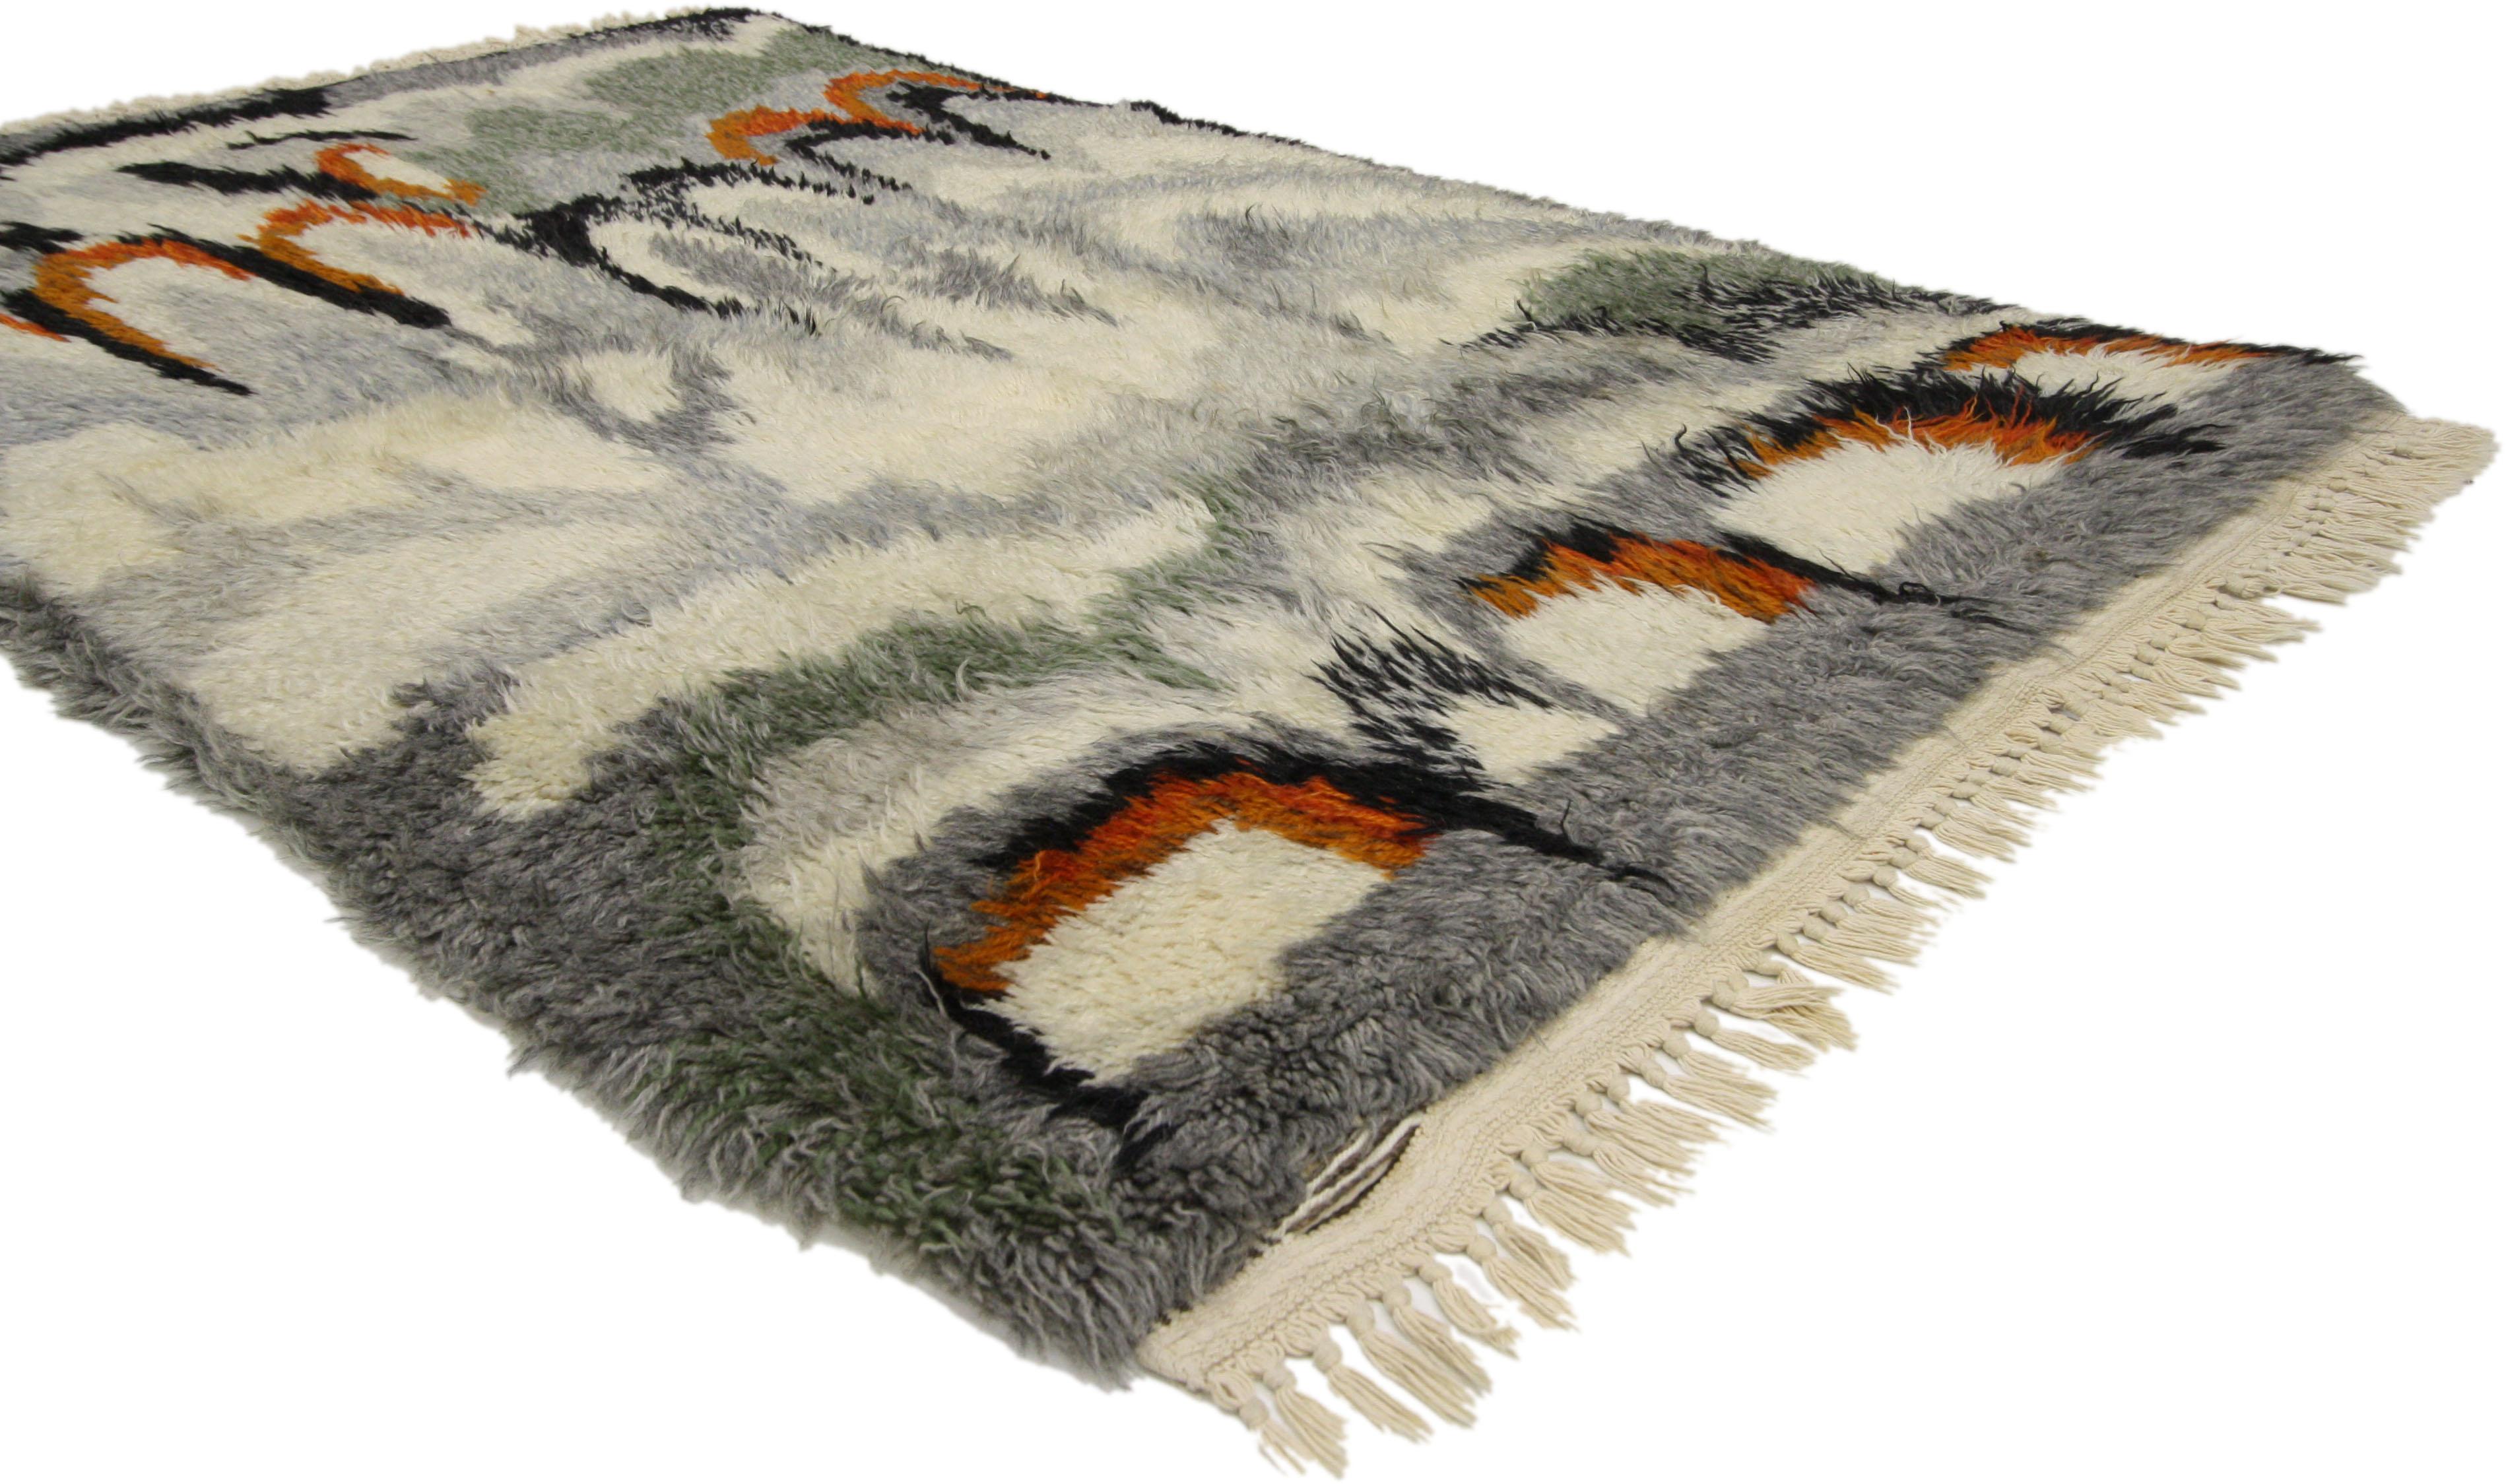 77046 Scandinavian Modern Swedish Vintage Ege Rya Rug, Danish Design Shag Tapestry. With it's abstract lunar pattern and warm earthy colors, this hand-knotted wool vintage Swedish Ege Rya rug is rich in texture and will add much needed warmth to